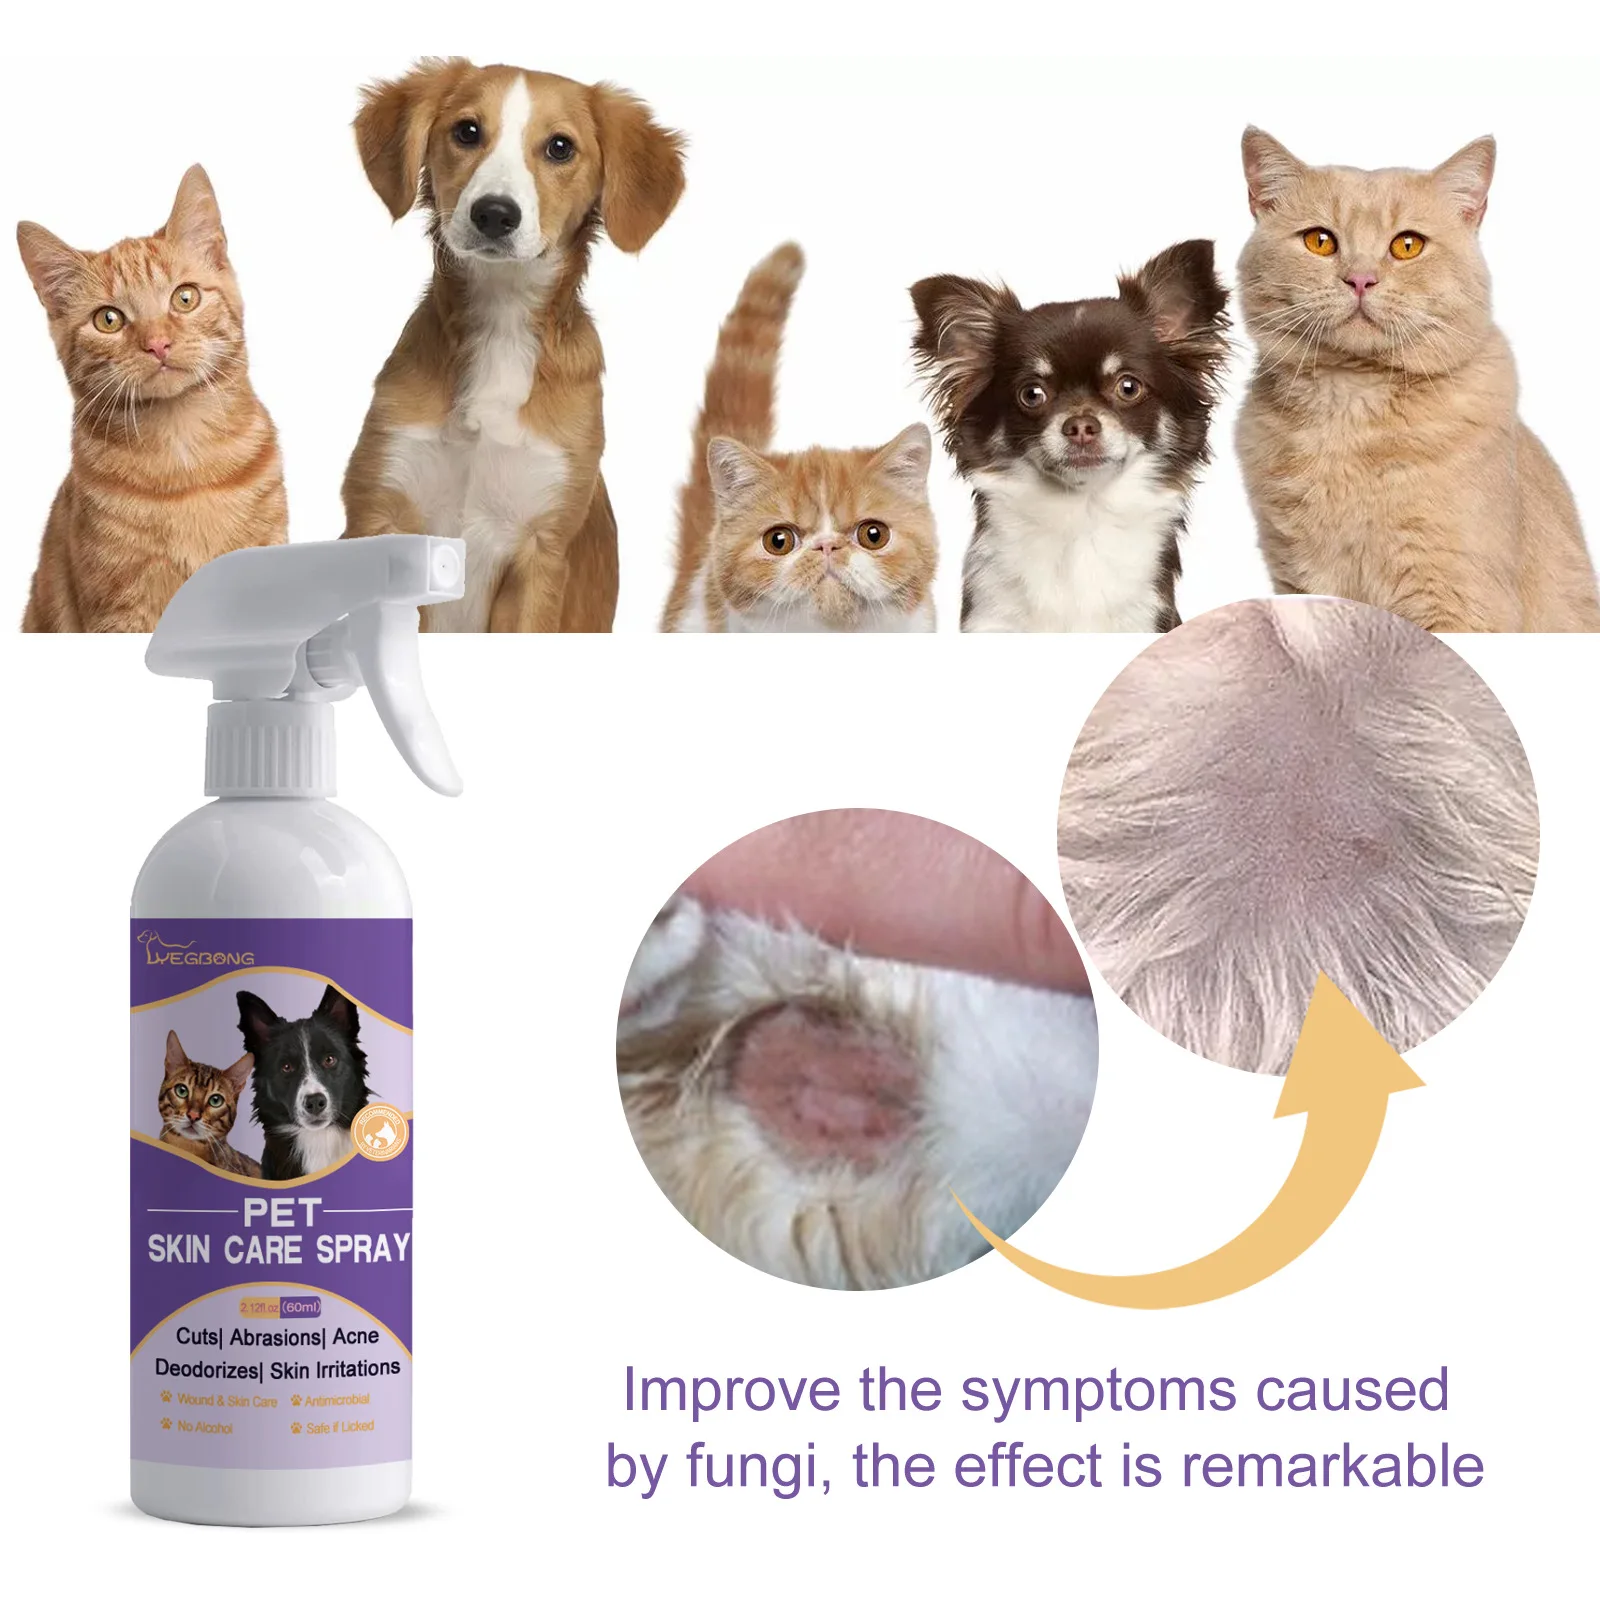 

60ml Pet Skin Care Spray Flea Lice Insect Killer Spray For Dog Cat Puppy Kitten Treatment Soothe Itching Remove Mites Eliminator